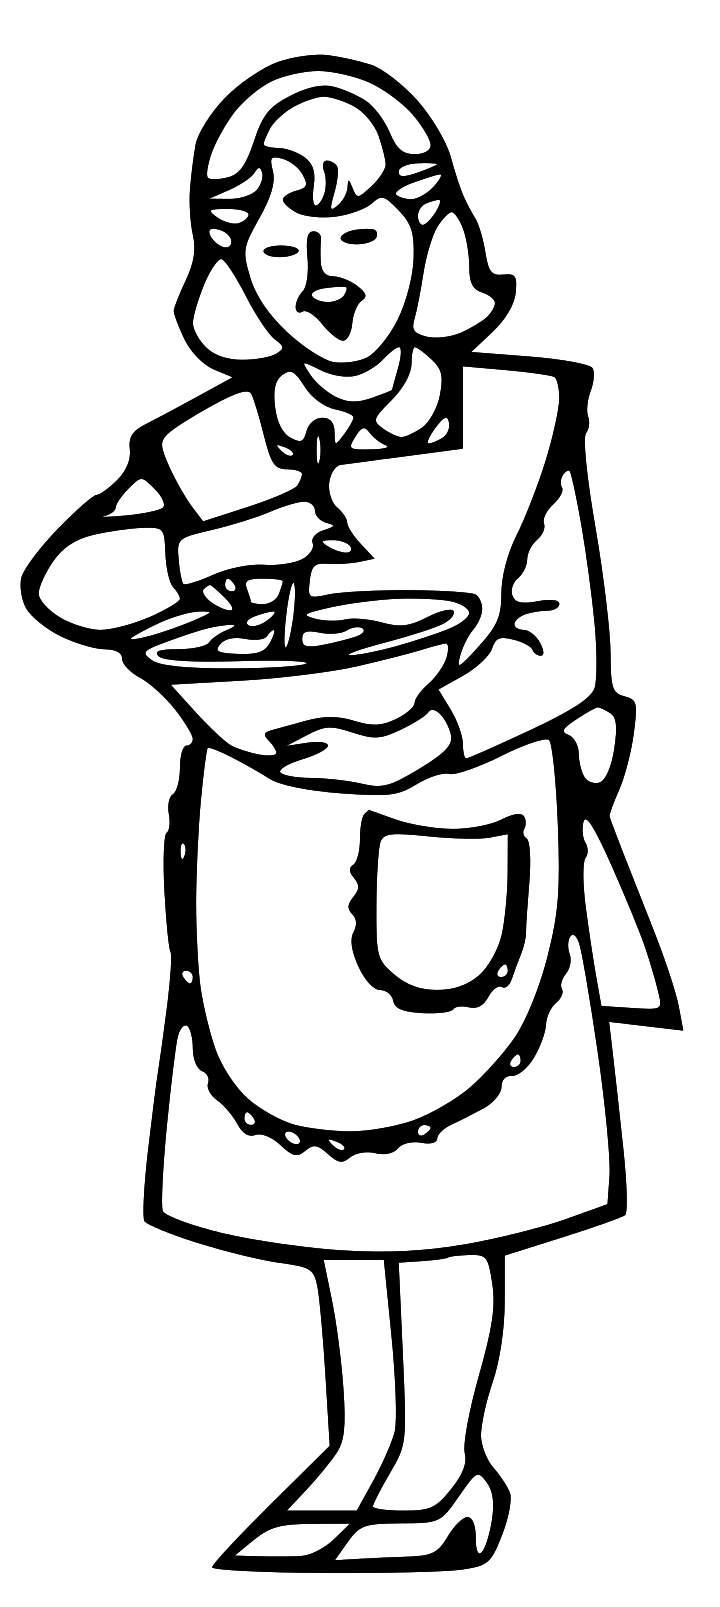 Mom cooking clipart.